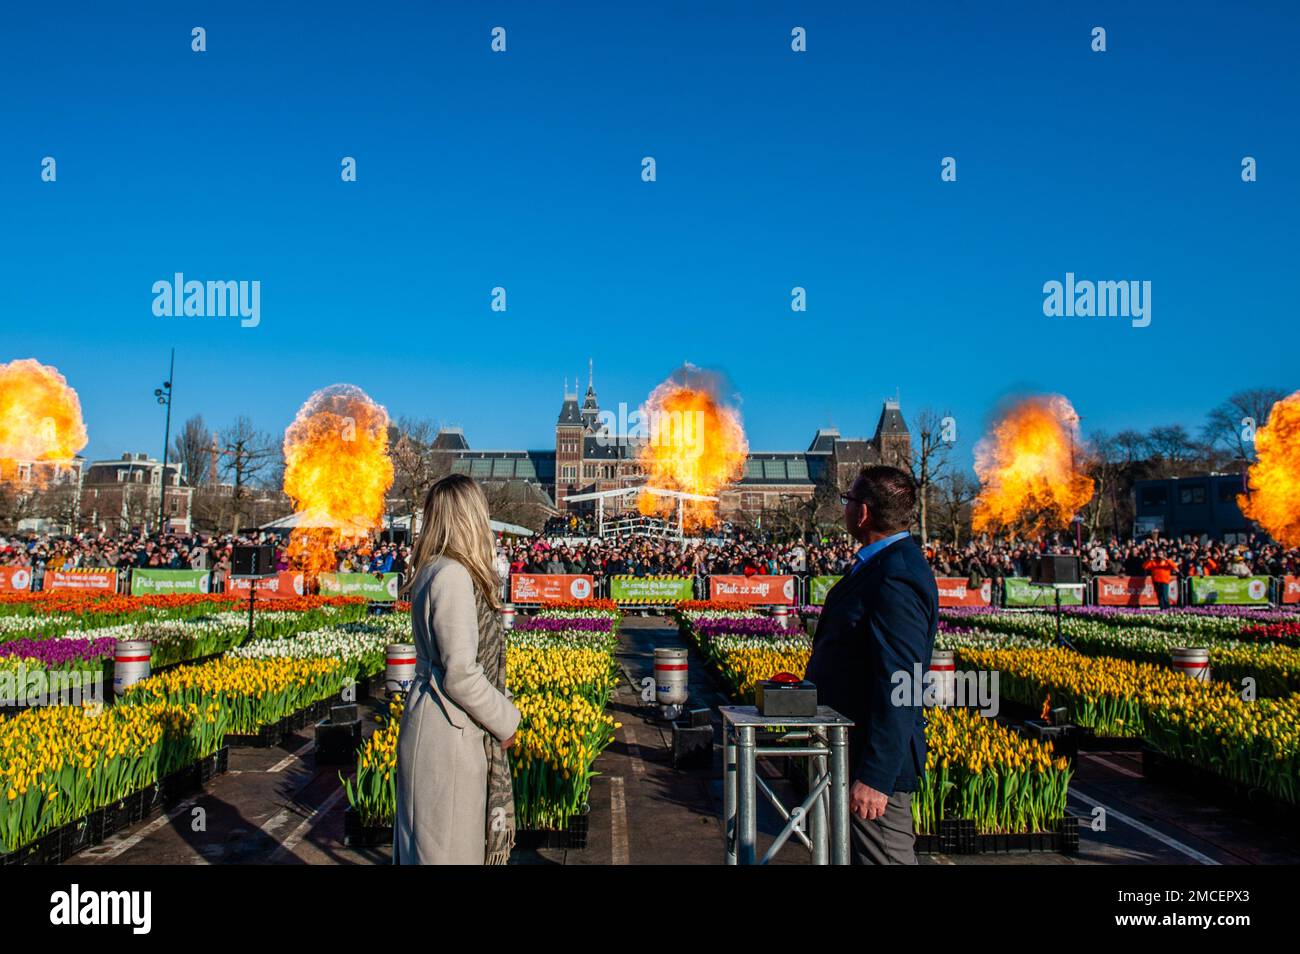 Olympic skating champion, Irene Schouten (left), and President of the organization 'Tulpen promotie Nederland', Arjan Smit (right) are seen watching the fire spectacle during the inauguration. Each year on the 3rd Saturday of January, the National Tulip Day is celebrated in Amsterdam. Dutch tulip growers built a huge picking garden with more than 200,000 colorful tulips at the Museumplein in Amsterdam. Visitors are allowed to pick tulips for free. The event was opened by Olympic skating champion, Irene Schouten. Prior to the opening, she christened a new tulip: Tulipa 'Dutch Pearl' as a refere Stock Photo